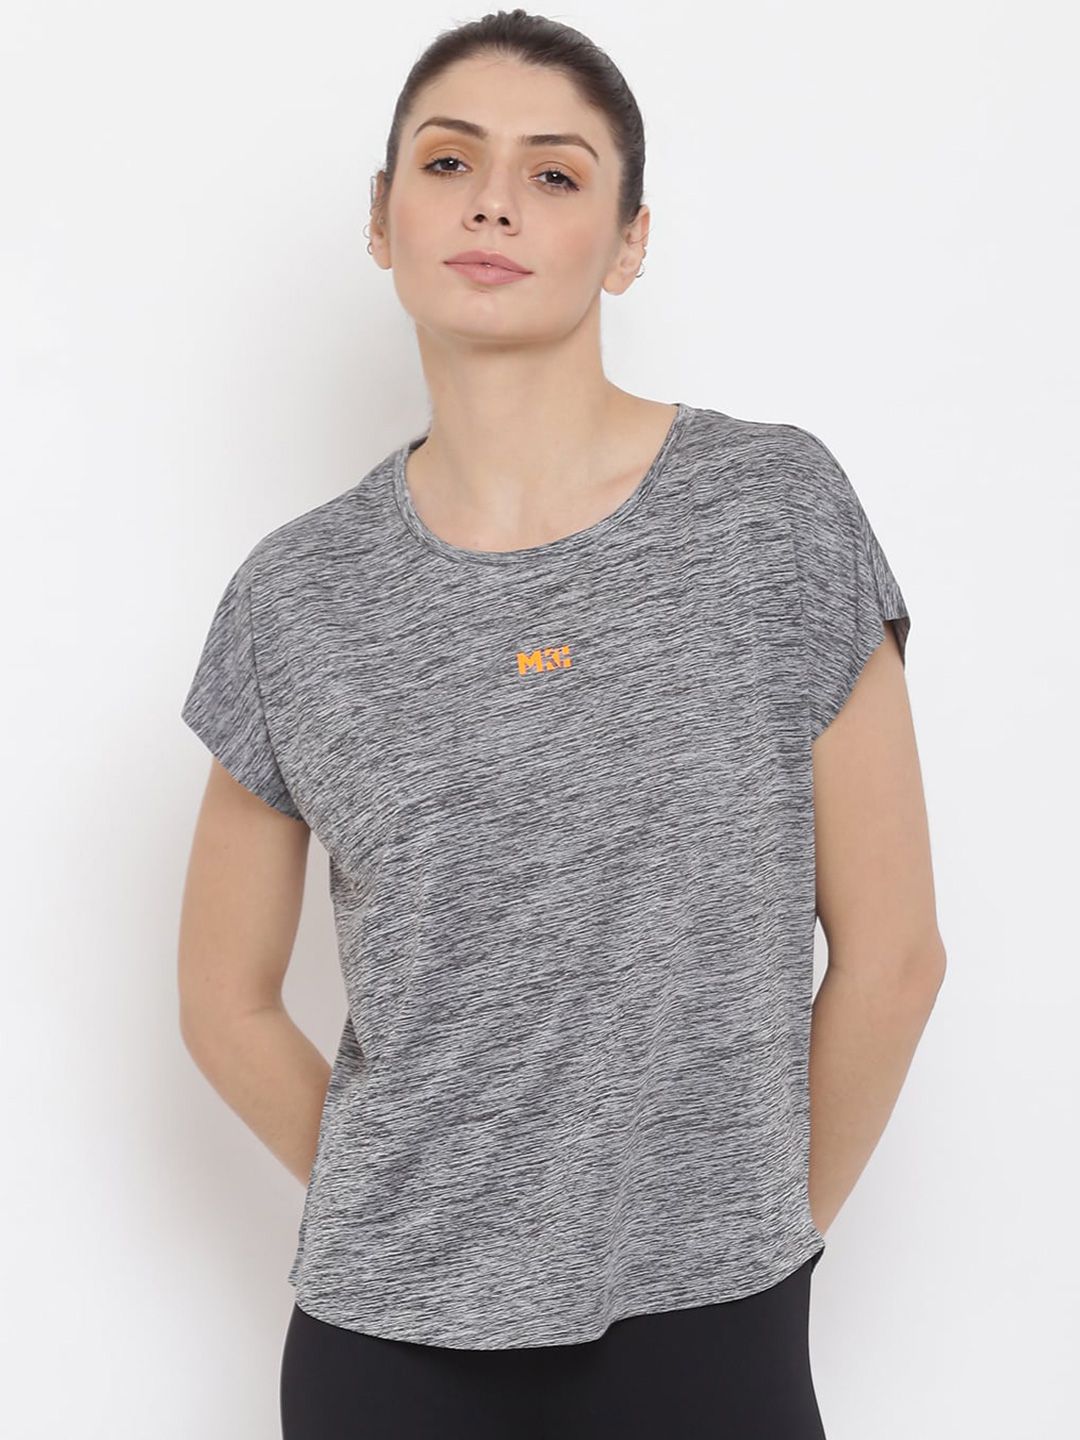 MKH Women Grey Extended Sleeves Dri-FIT T-shirt Price in India